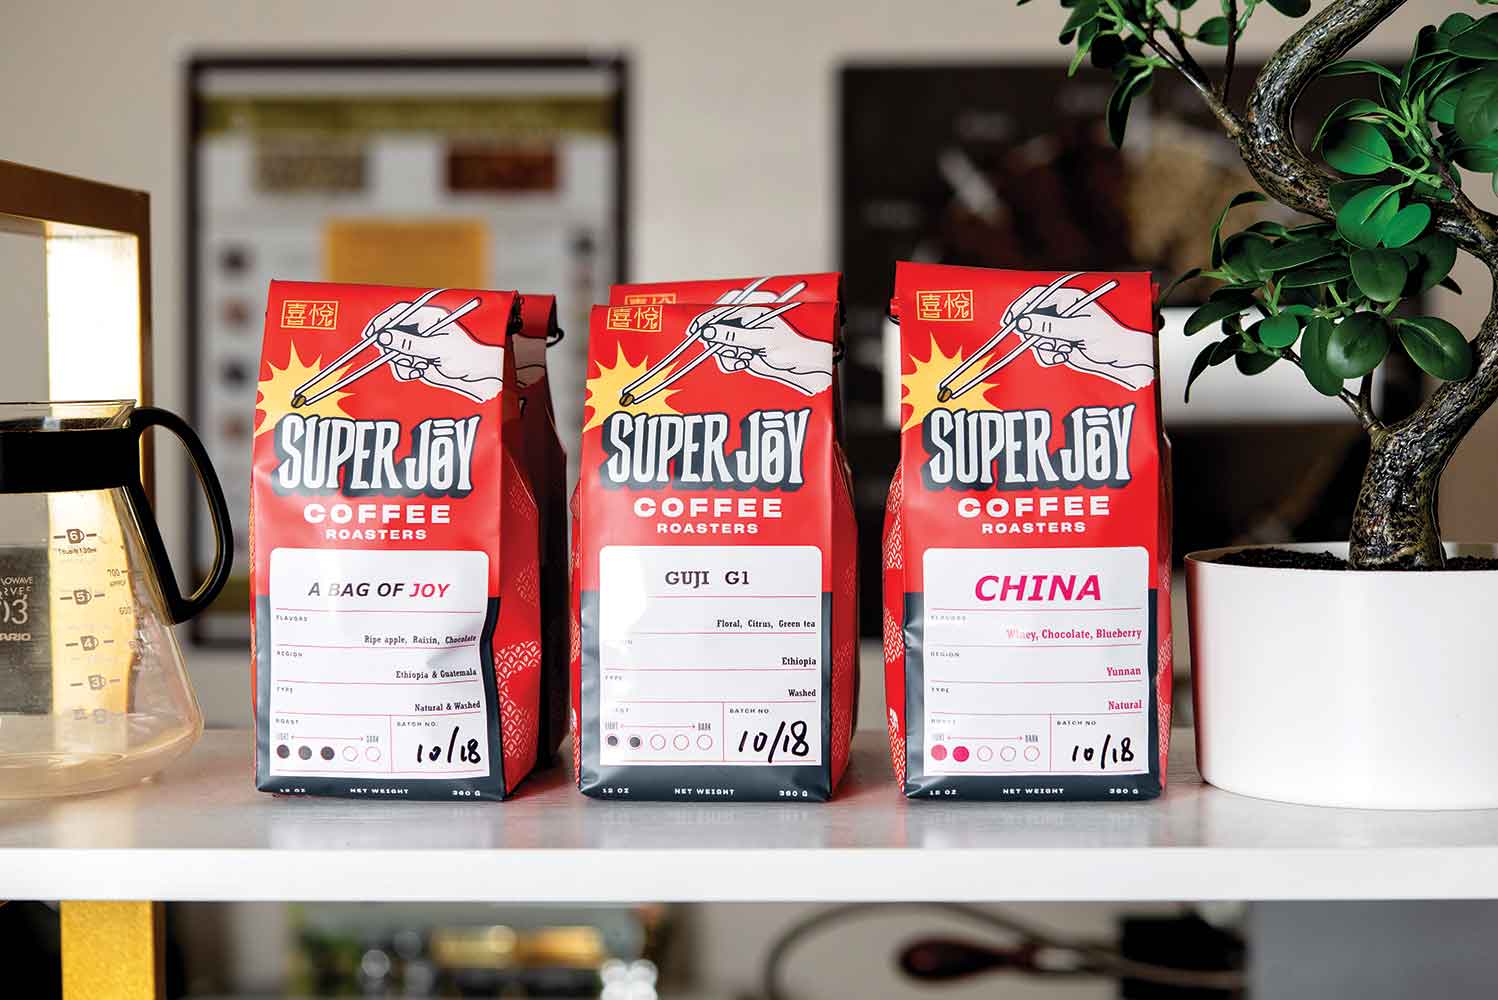 Retail coffee bags of Super Joy Coffee from China.